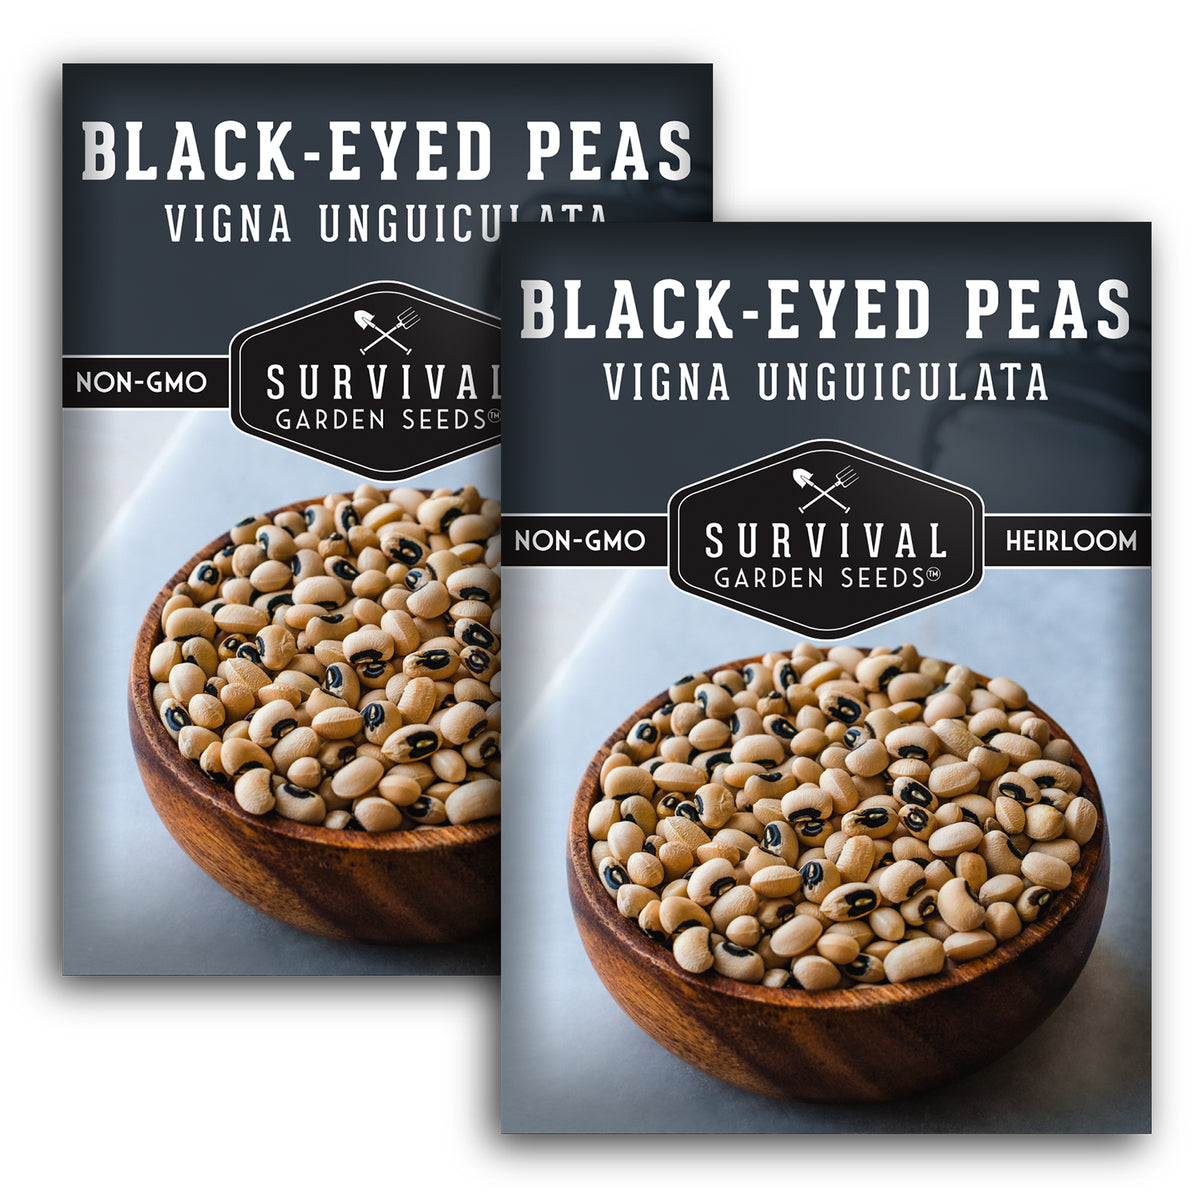 2 packets of Black-Eyed Pea seeds